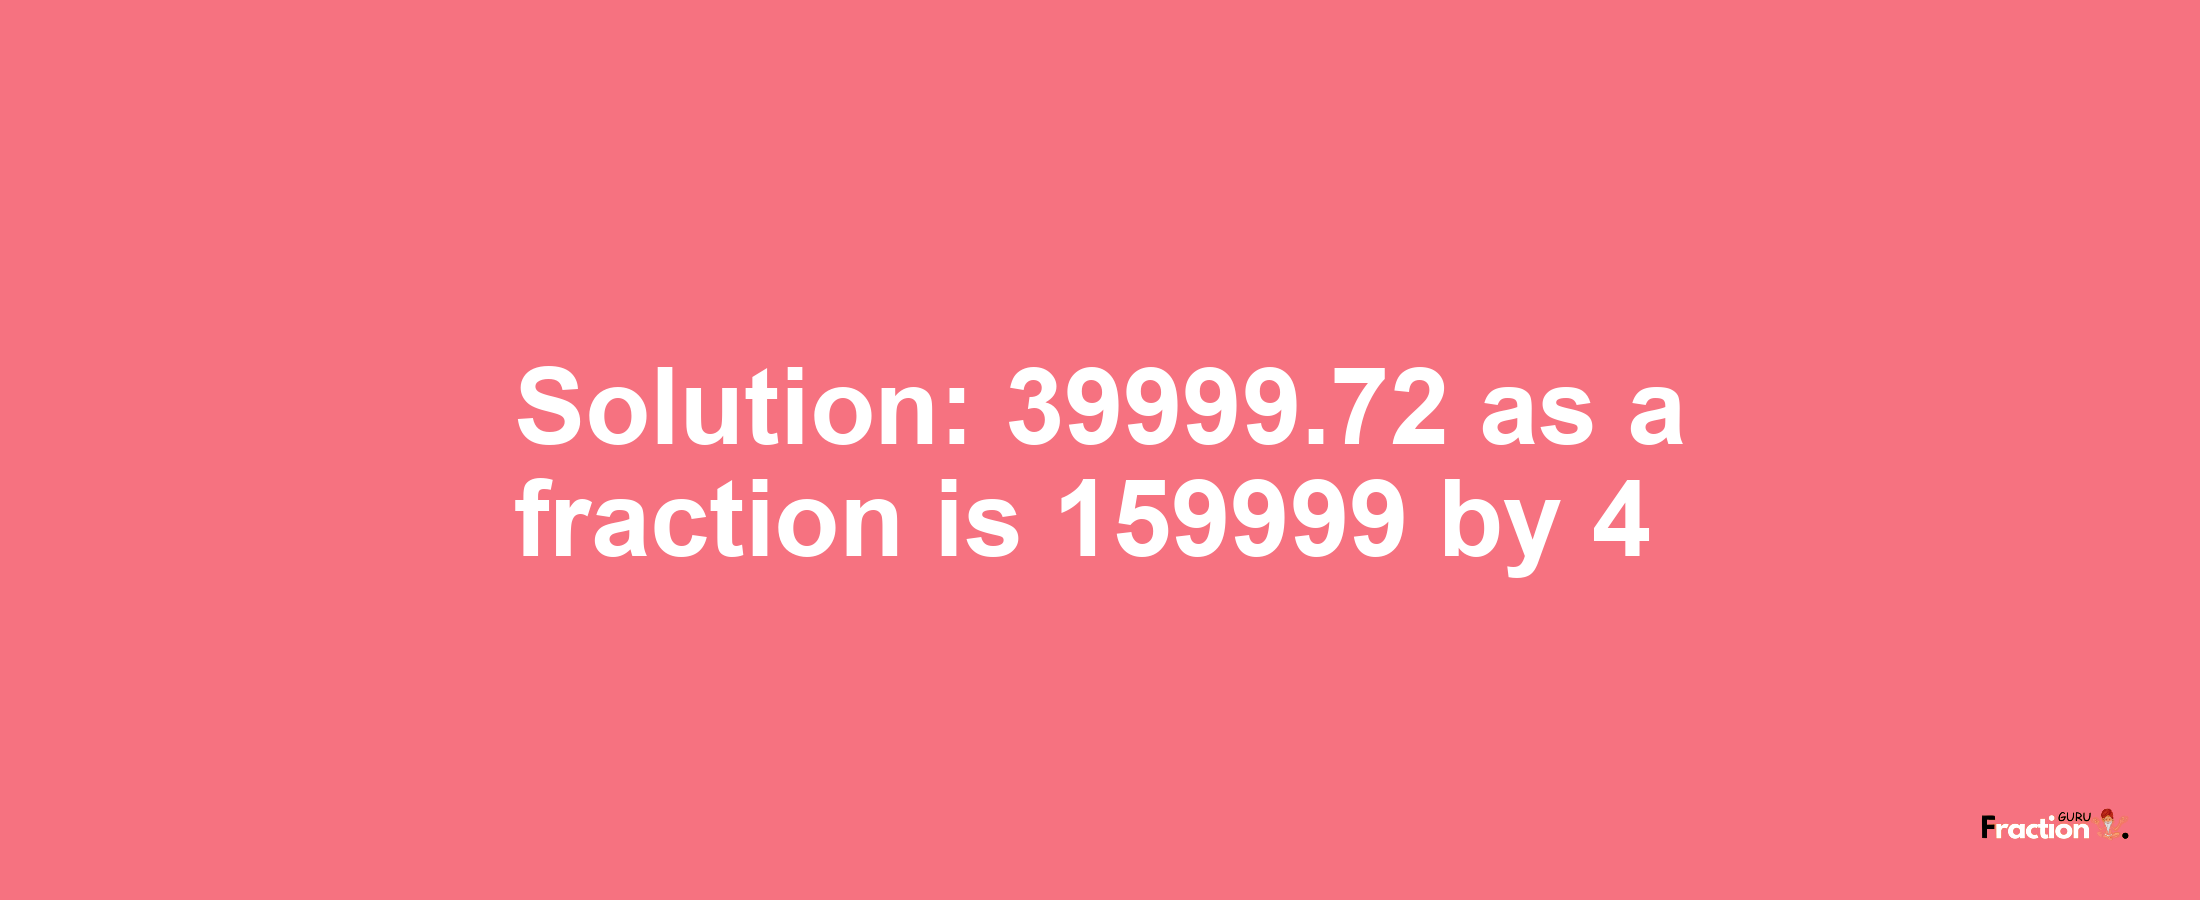 Solution:39999.72 as a fraction is 159999/4